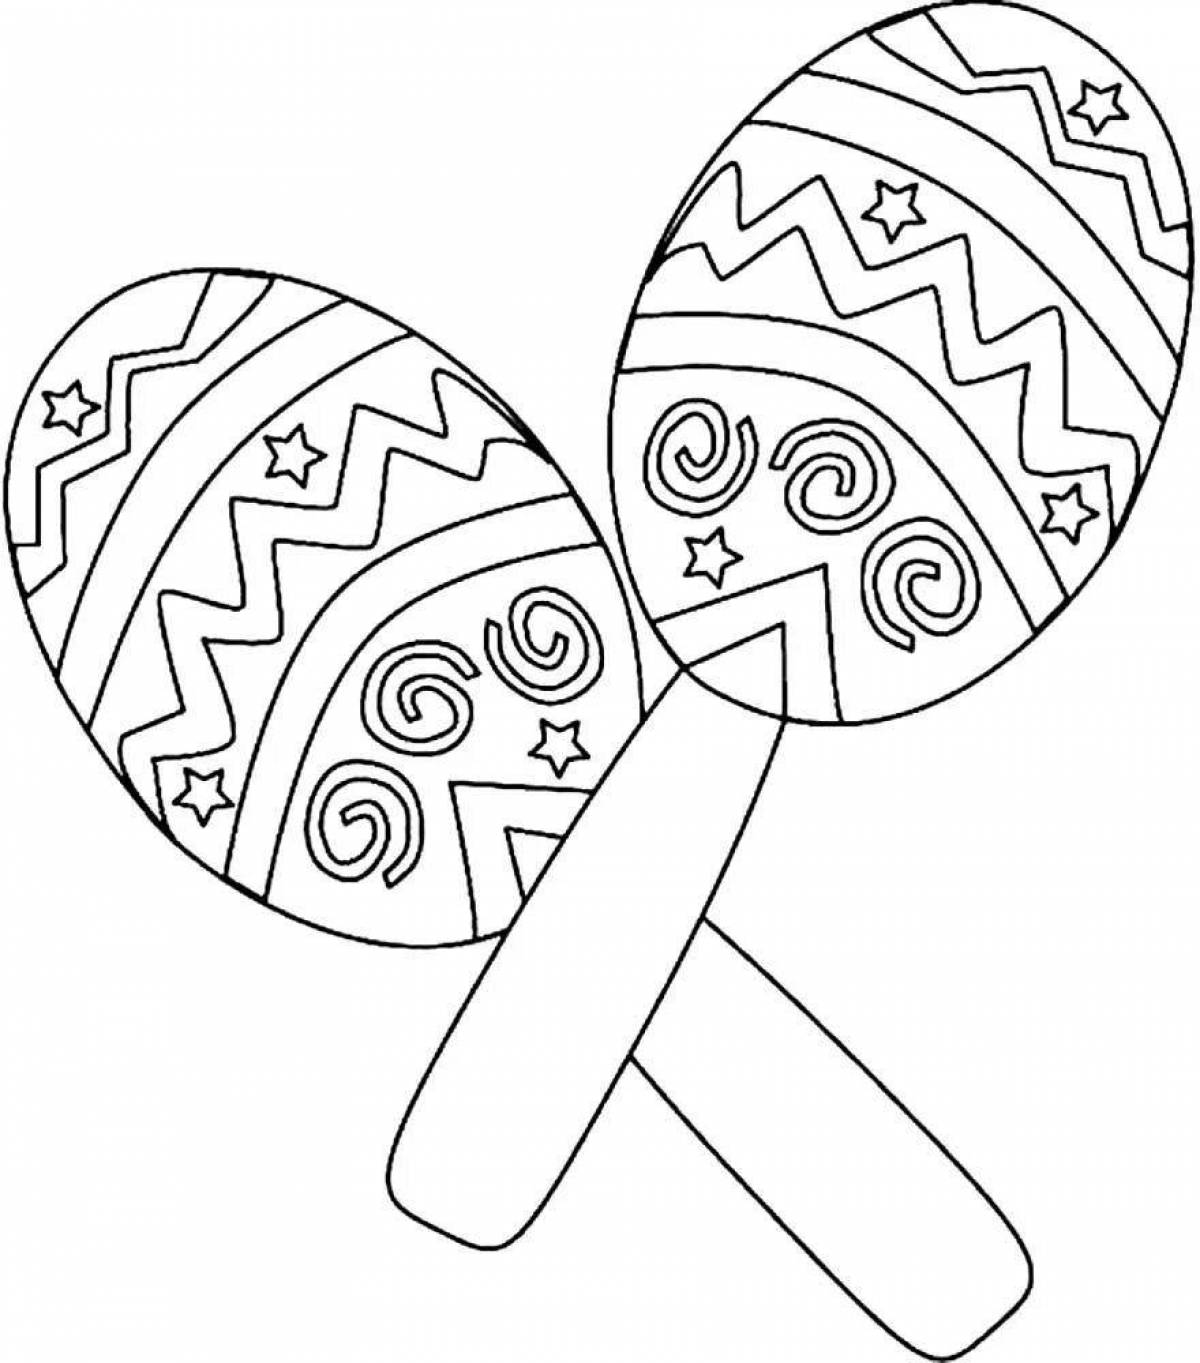 Amazing folk musical instruments coloring pages for kids